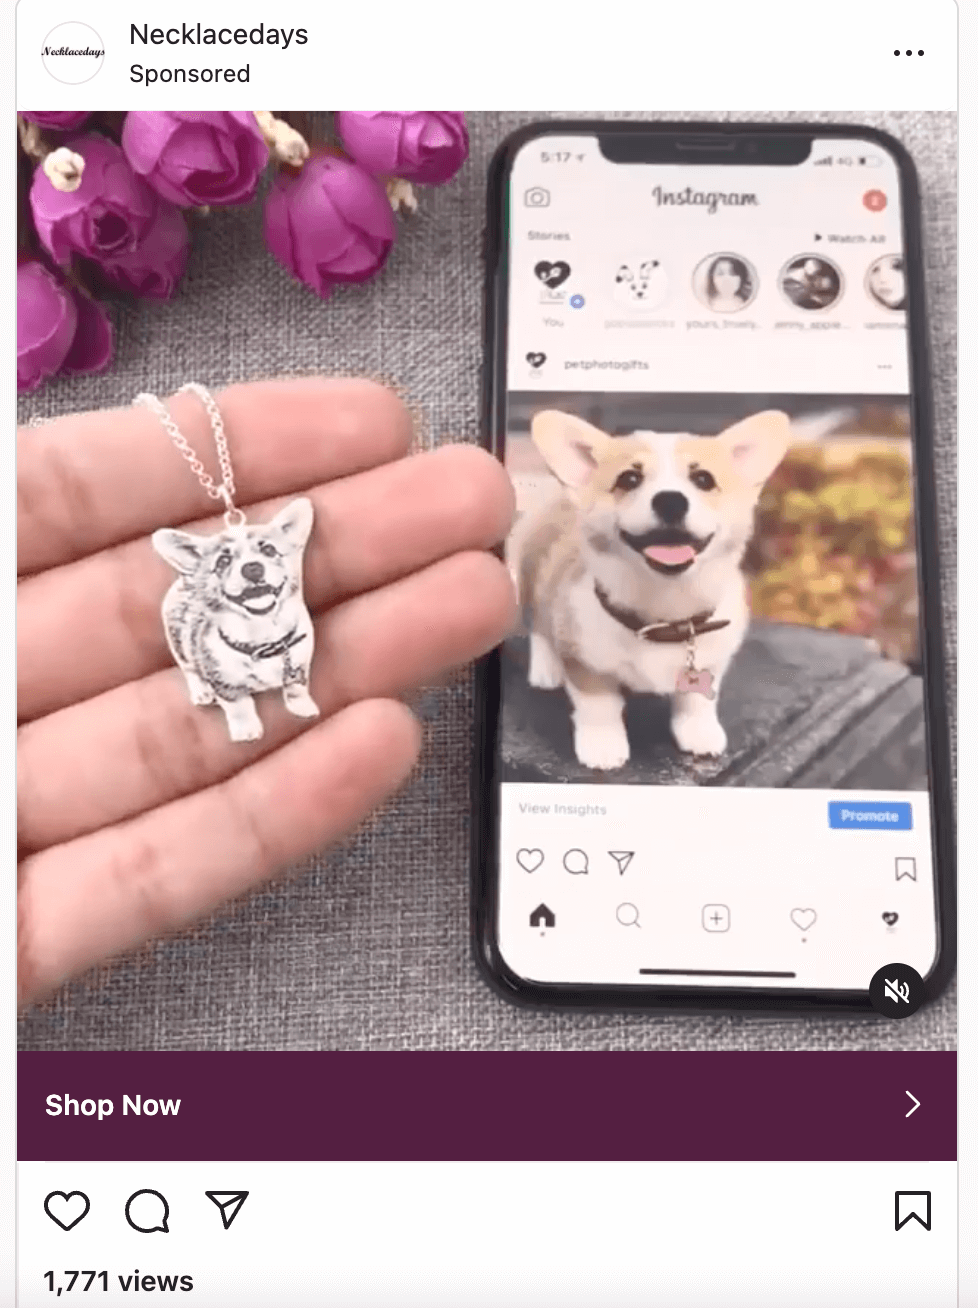 Necklacedays shop showcasing personalized necklace made from a picture of a dog